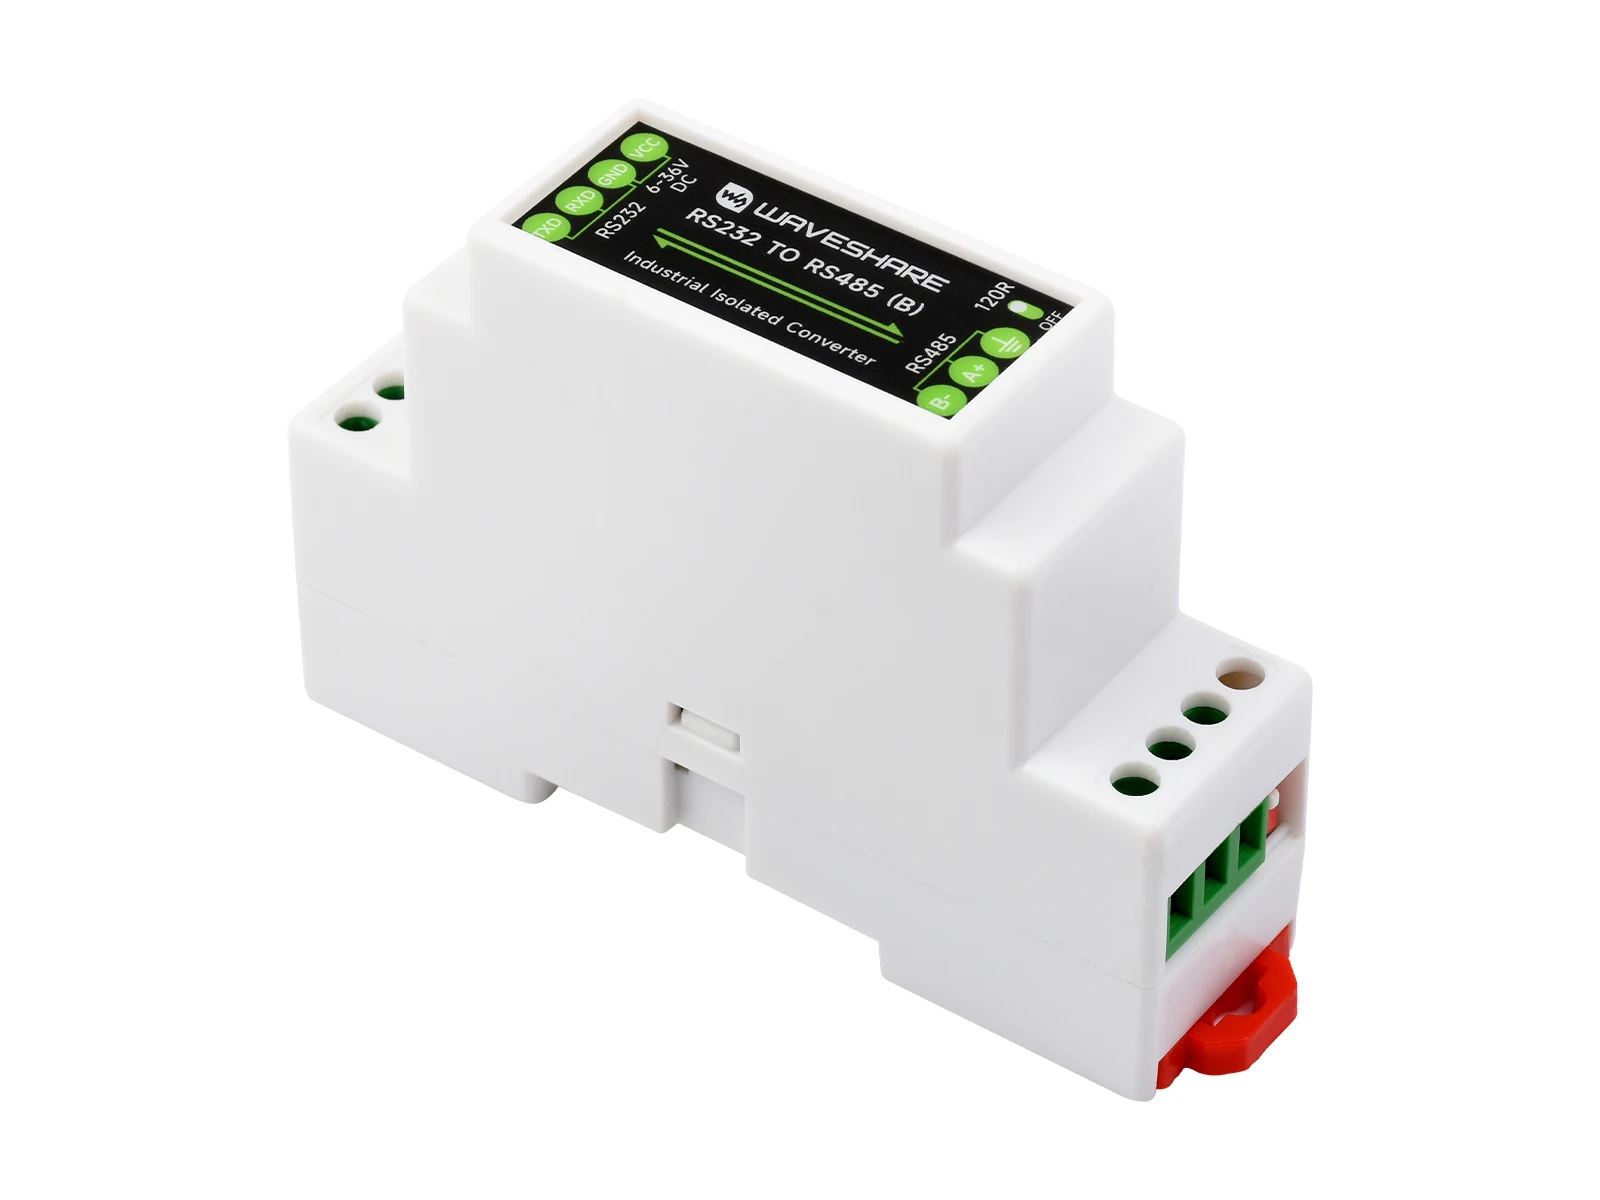 

WS RS232 To RS485 Converter (B), Active Digital Isolator, Rail-Mount support, 600W Lightningproof & Anti-Surge 6~36V DC